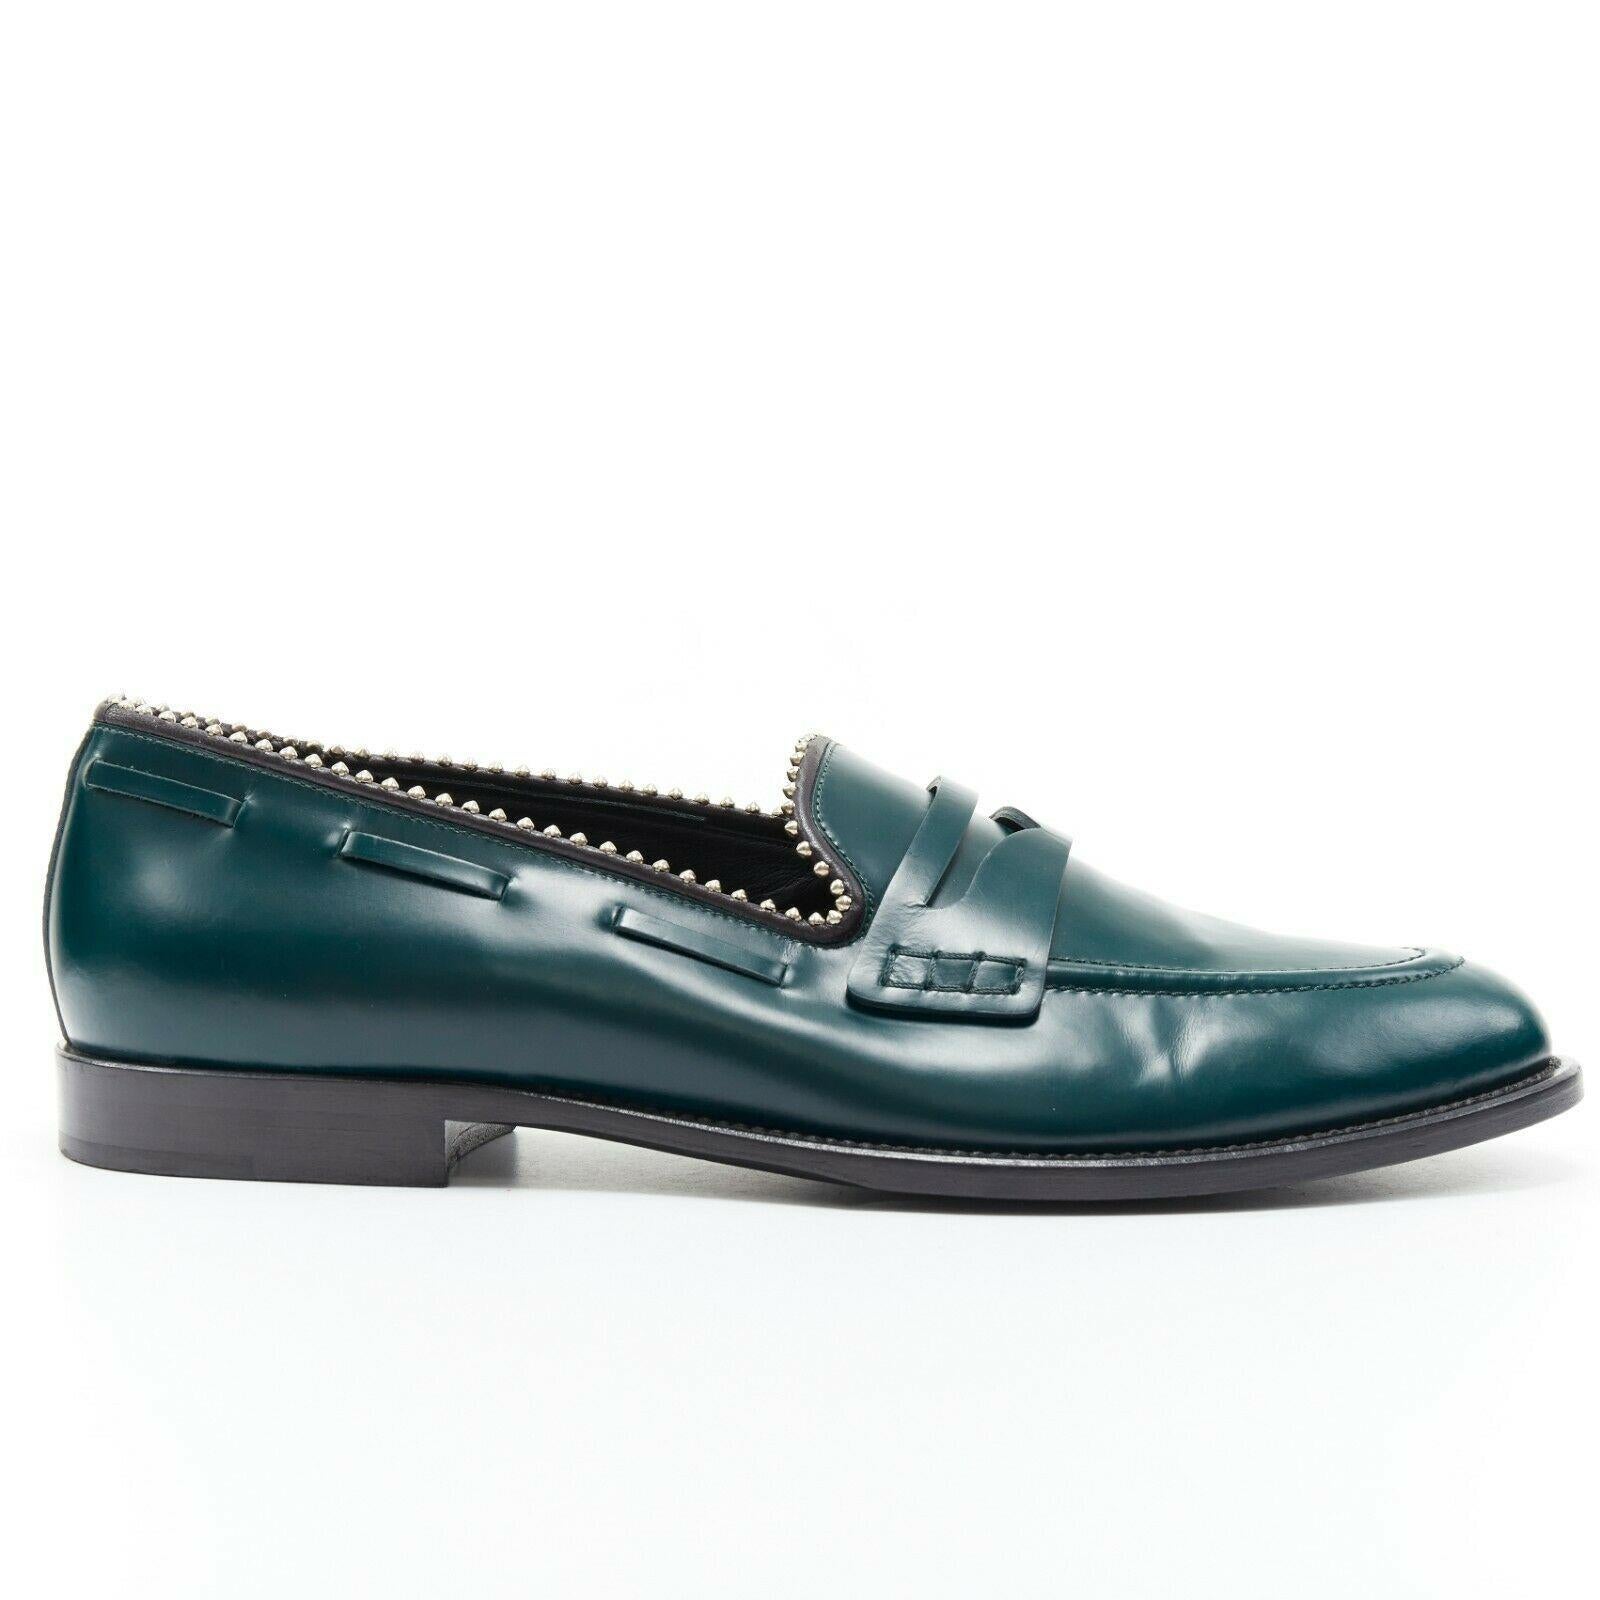 GIUSEPPE ZANOTTI green leather silver stud trimmed penny loafer EU44

GIUSEPPE ZANOTTI
Dark green leather upper. Silver stud embellishment along opening trim. Cut out detail at front flap. Stitch detail along side. Tonal stitching. Stacked wooden